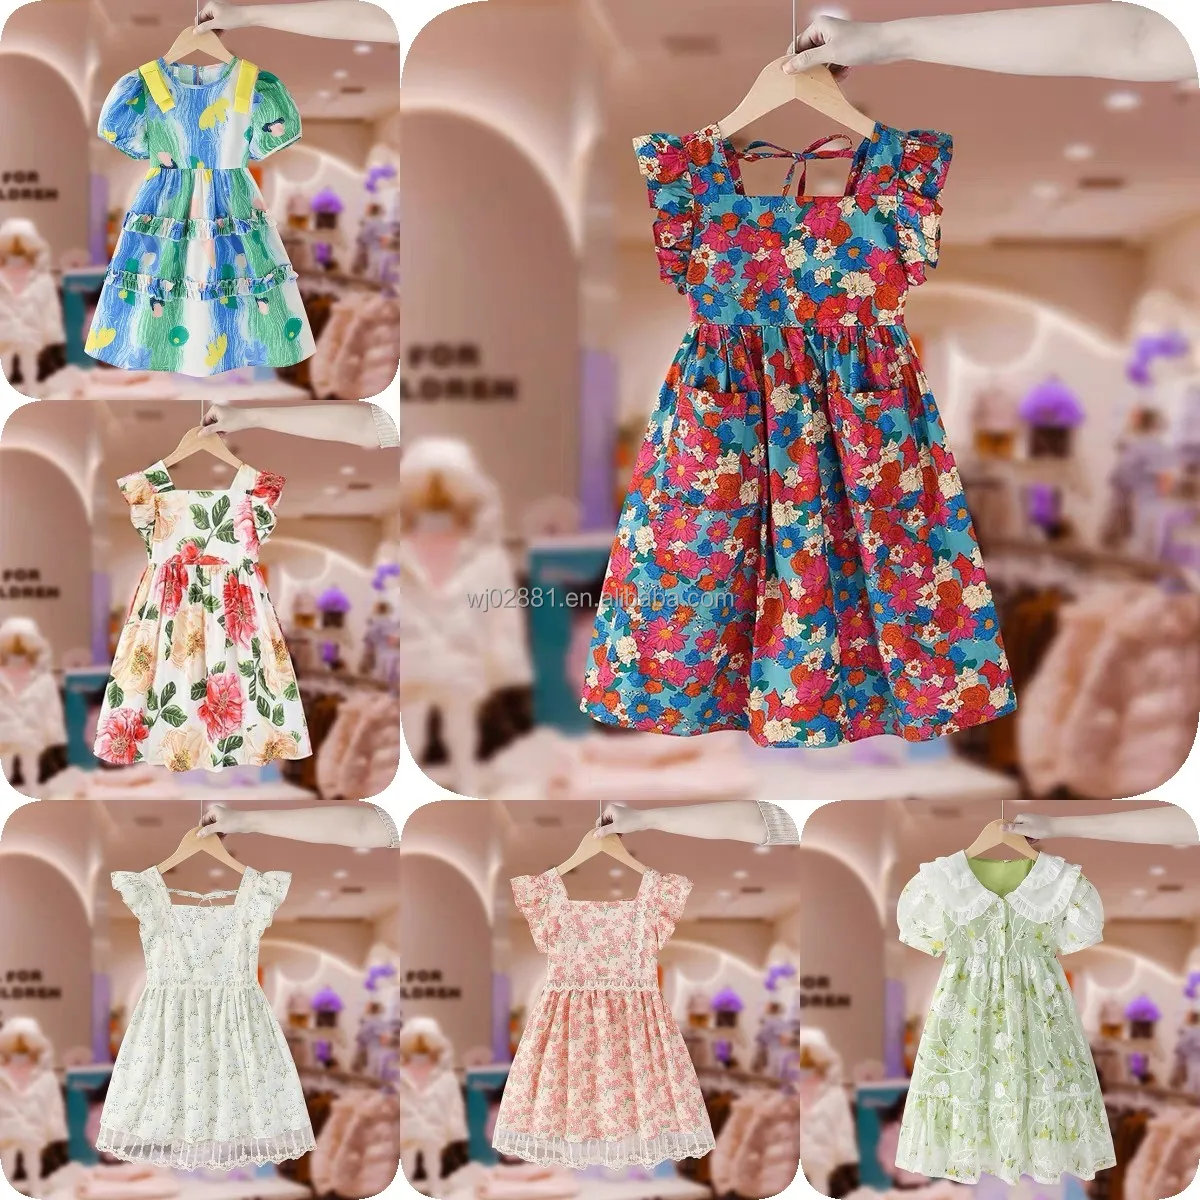 Baby Girl Clothes Princess Dress Infant Birthday Party Kids Flower Girl Dress New Fashion Toddler Baby Girl Clothes Kids Dress